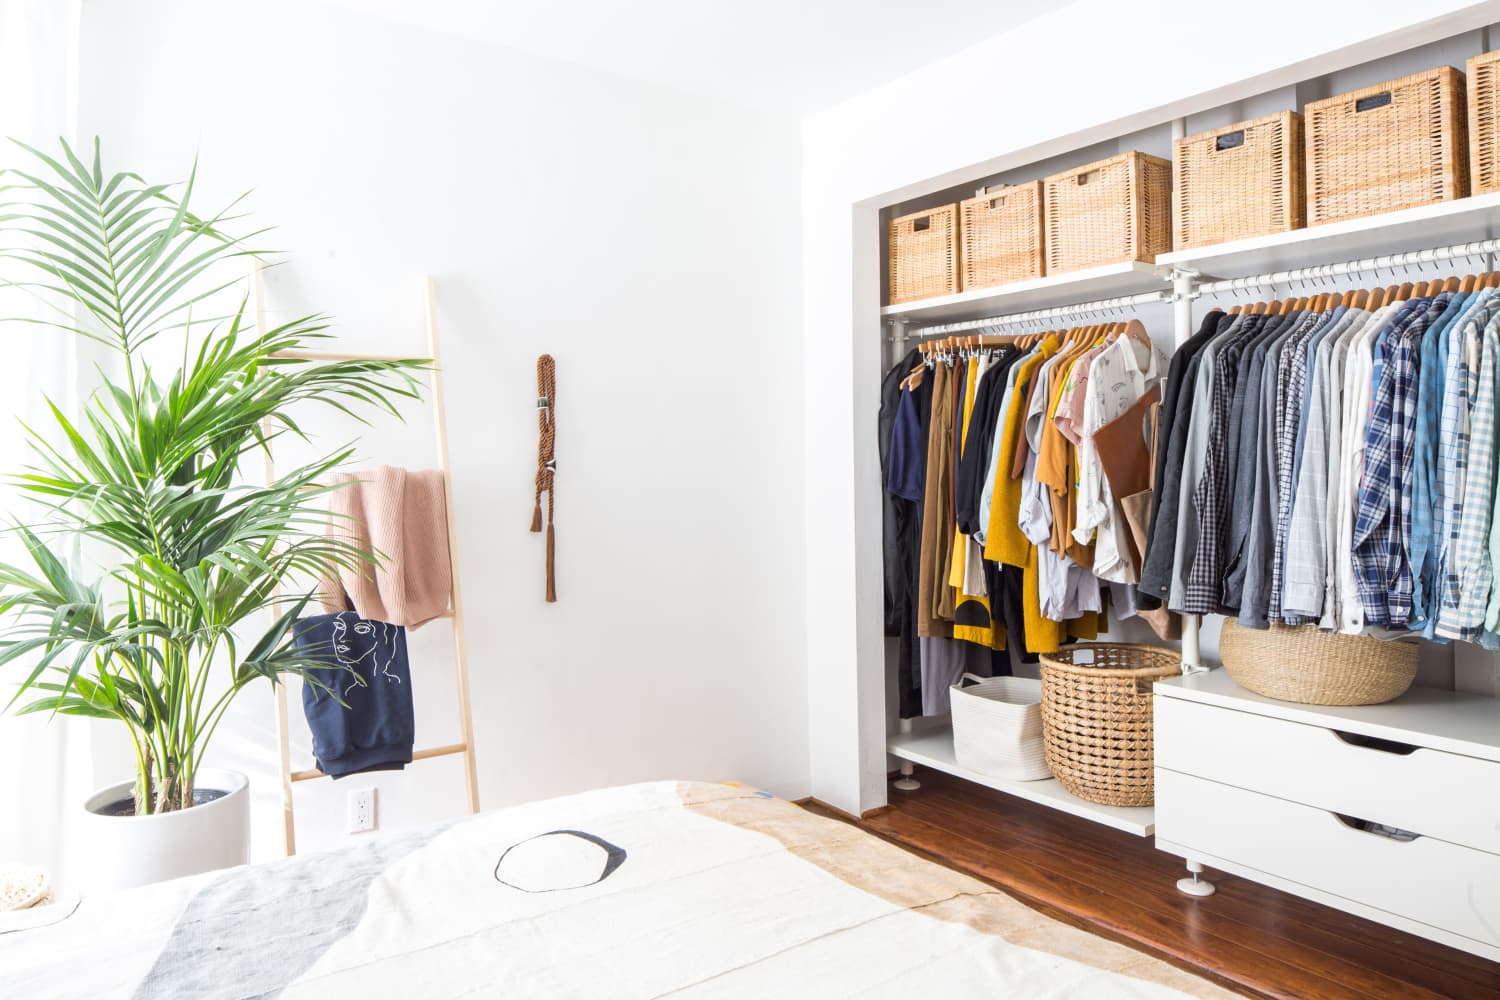 This $12 Amazon Find Doubled My Closet Space